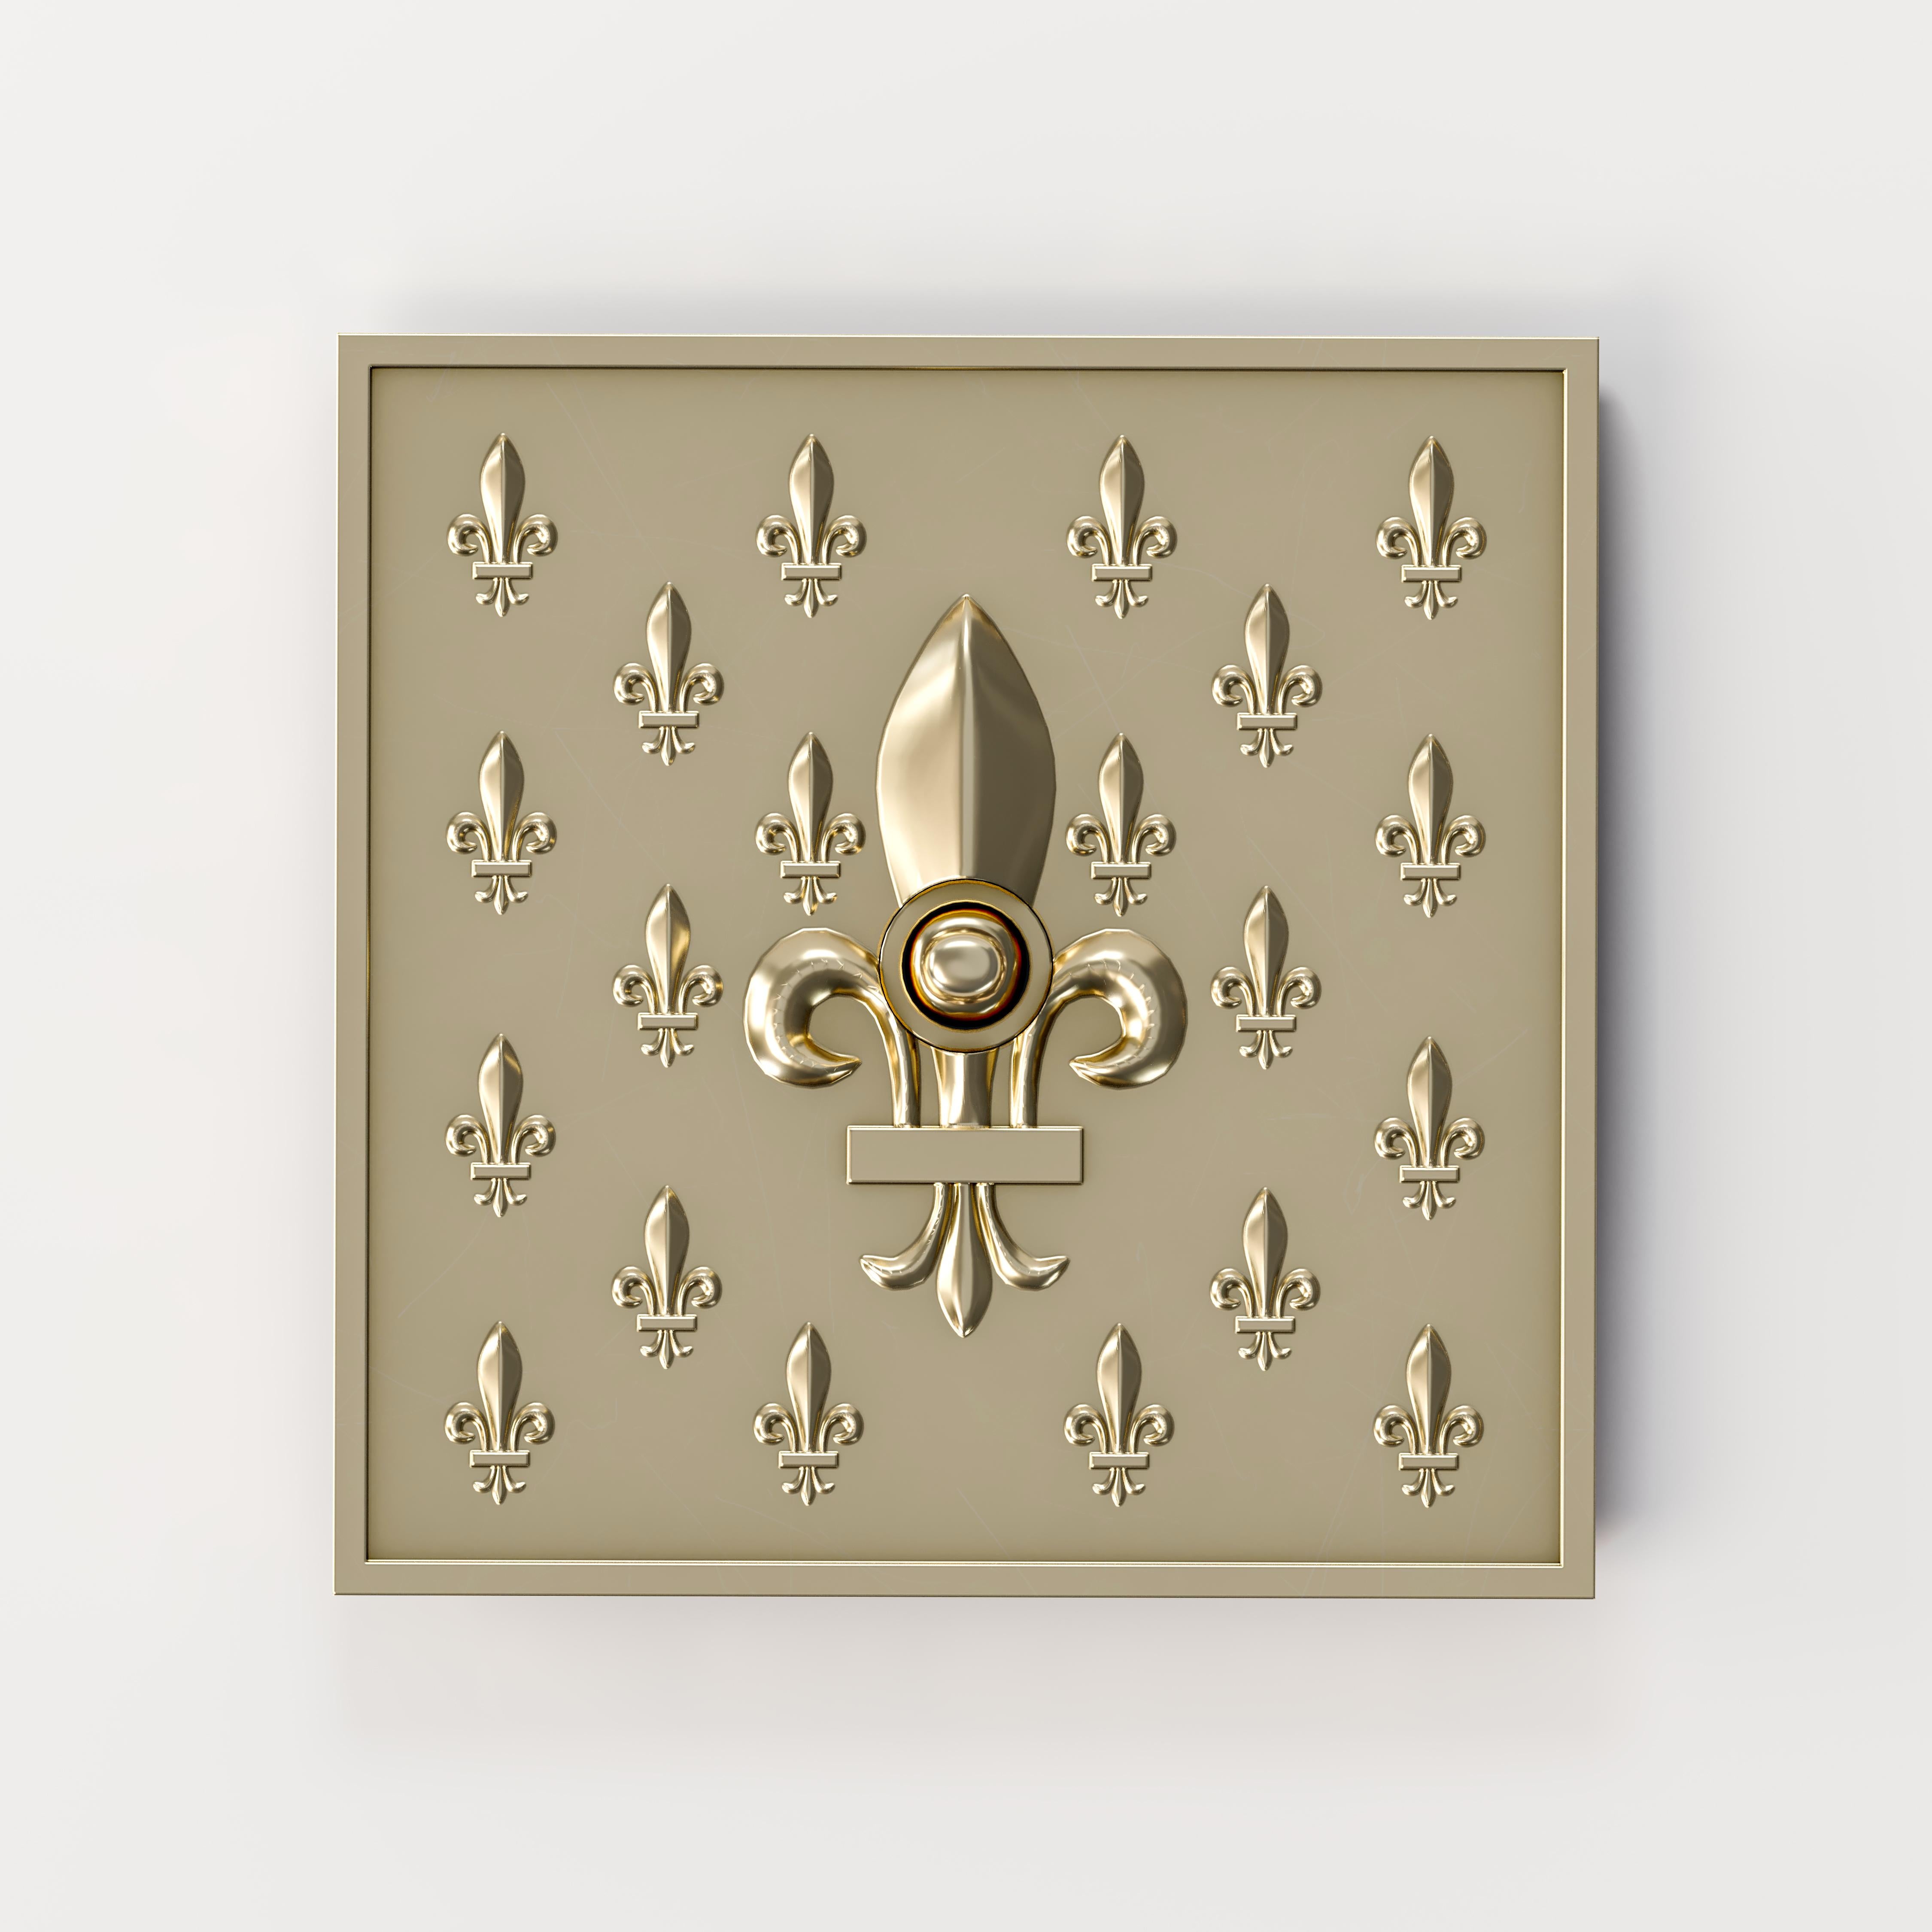 Versailles Nickel Light Socket by Jérôme Bugara
Dimensions: W 9,4 x H 9,4 cm.
Materials: Nickel.

Available in different finishes. Please contact us.

Jérôme Bugara, trained at the prestigious Ecole Boulle, is a renowned interior architect and